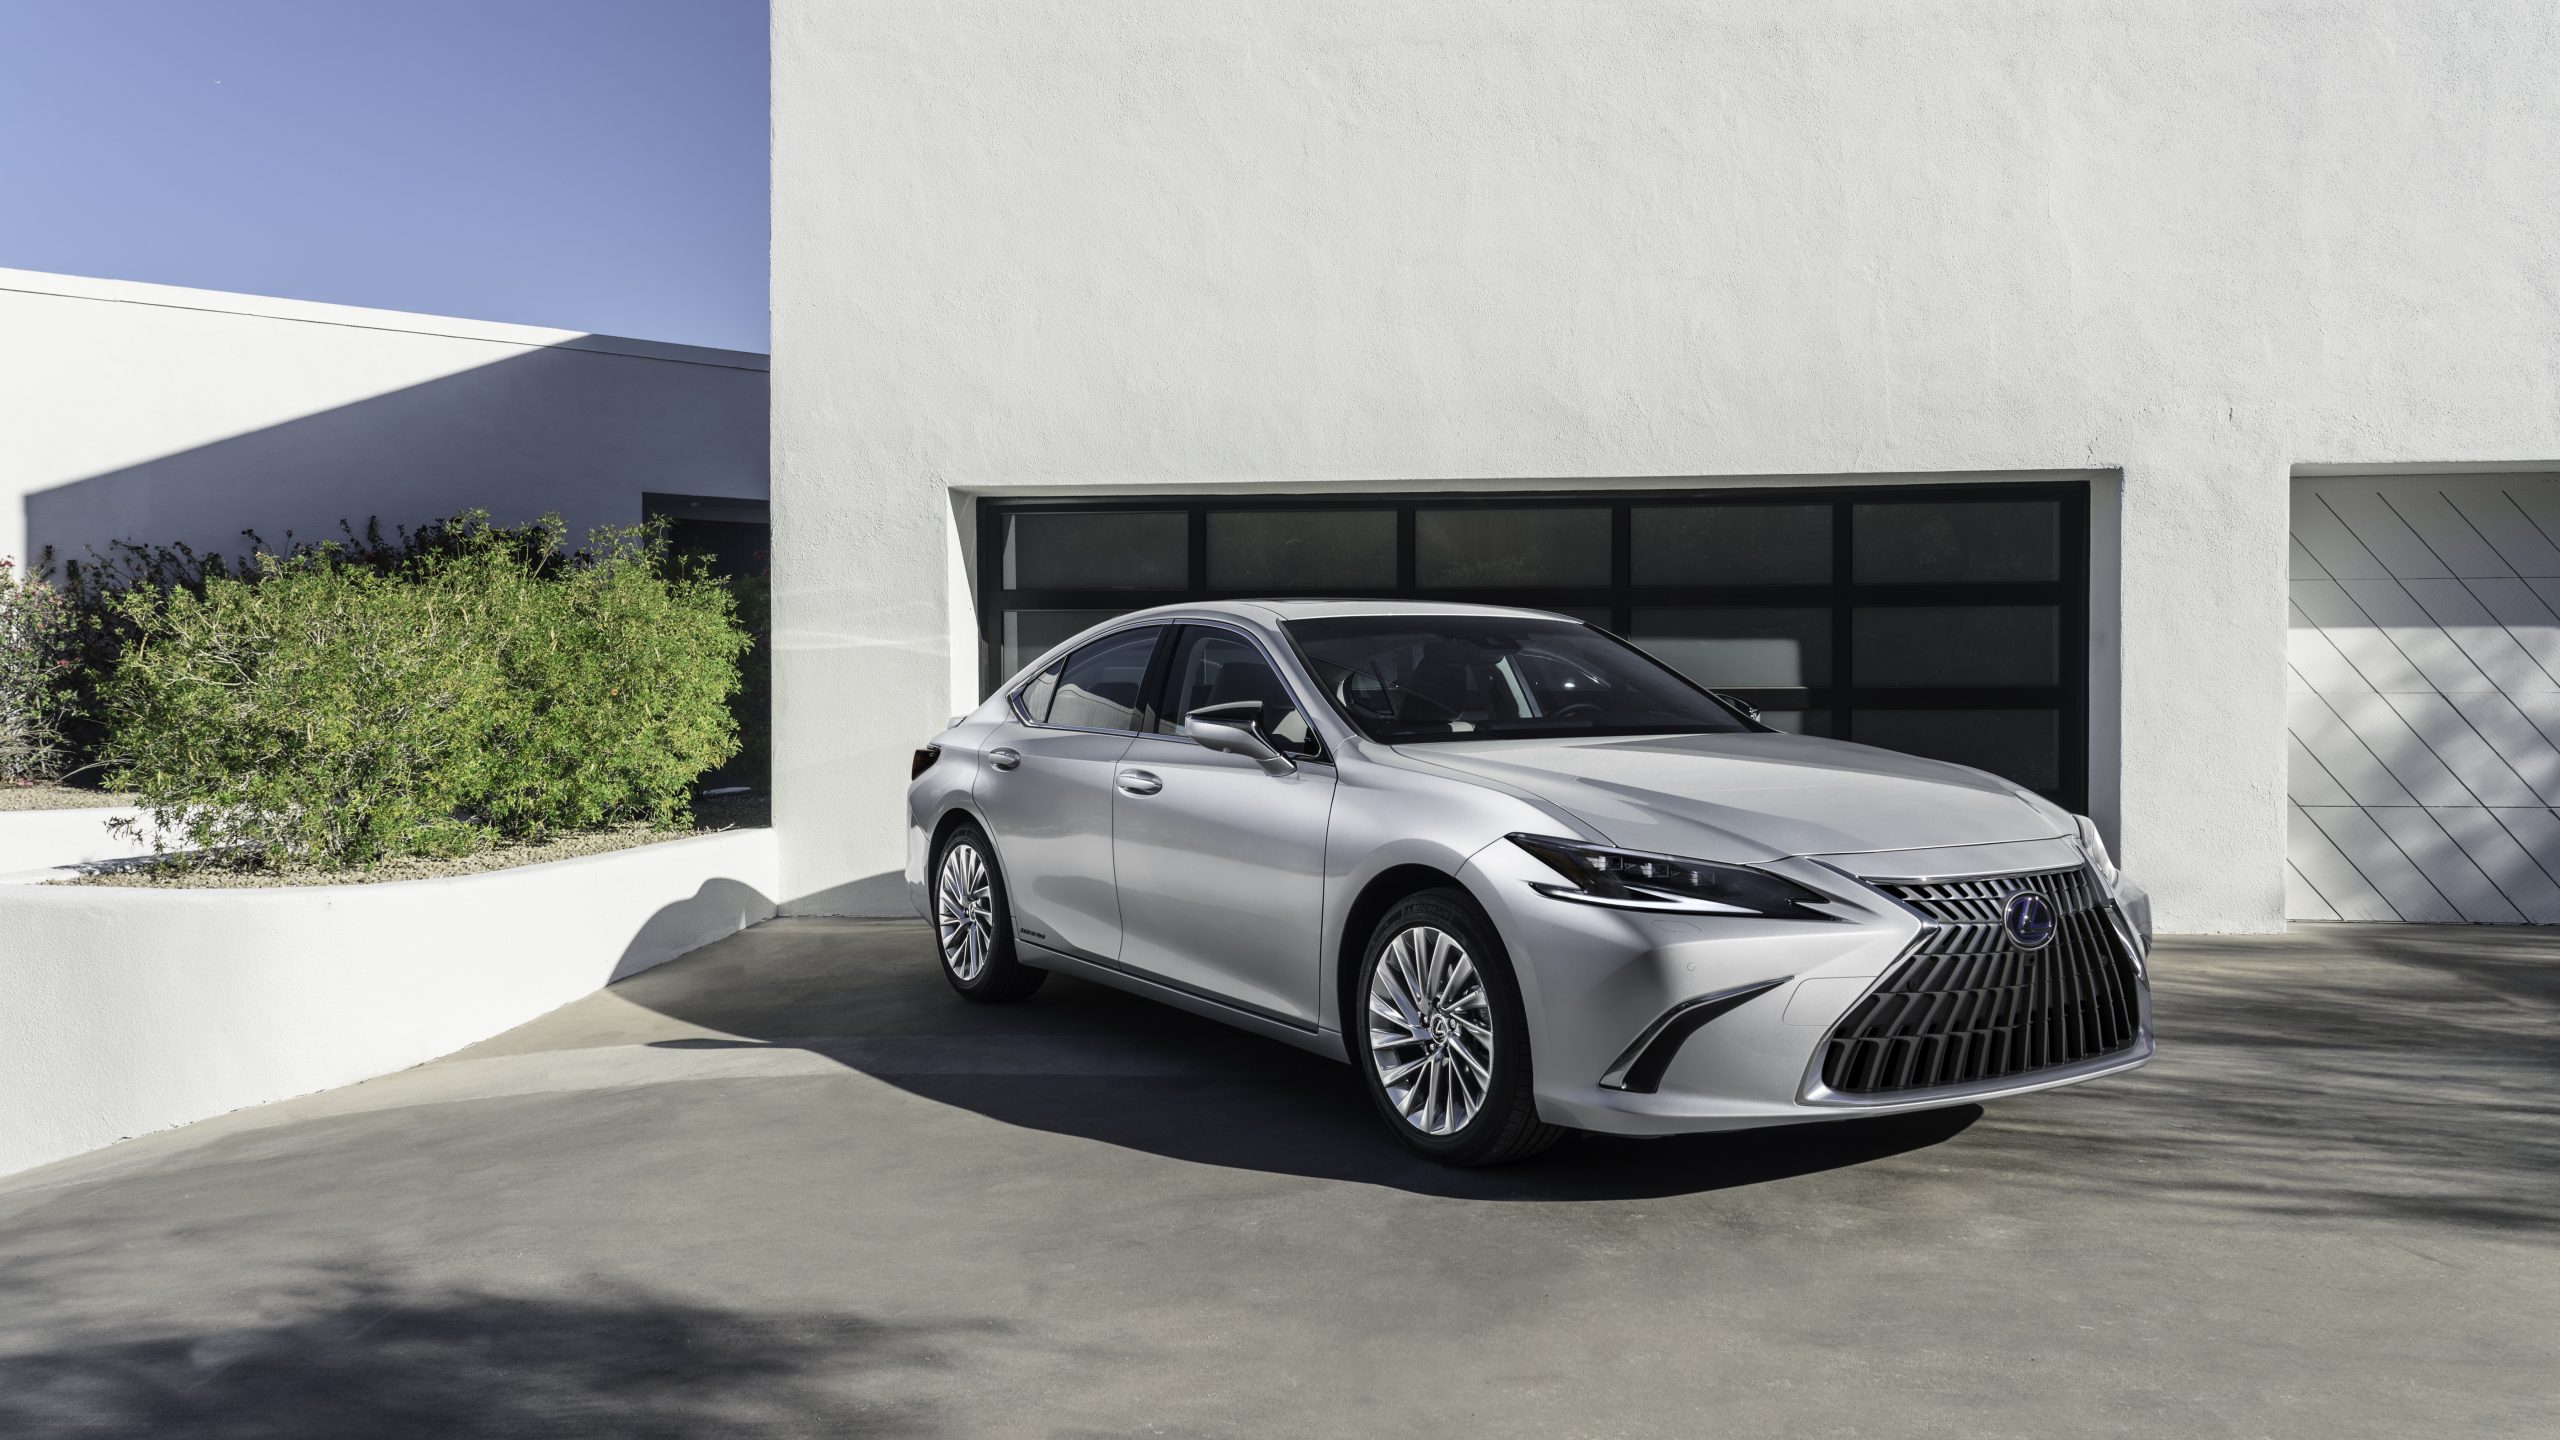 LEXUS ES FAMILY RETURNS FOR 2022 WITH UPDATED TECH, SAFETY, FIRST-EVER 300H  F SPORT GRADE - Lexus USA Newsroom